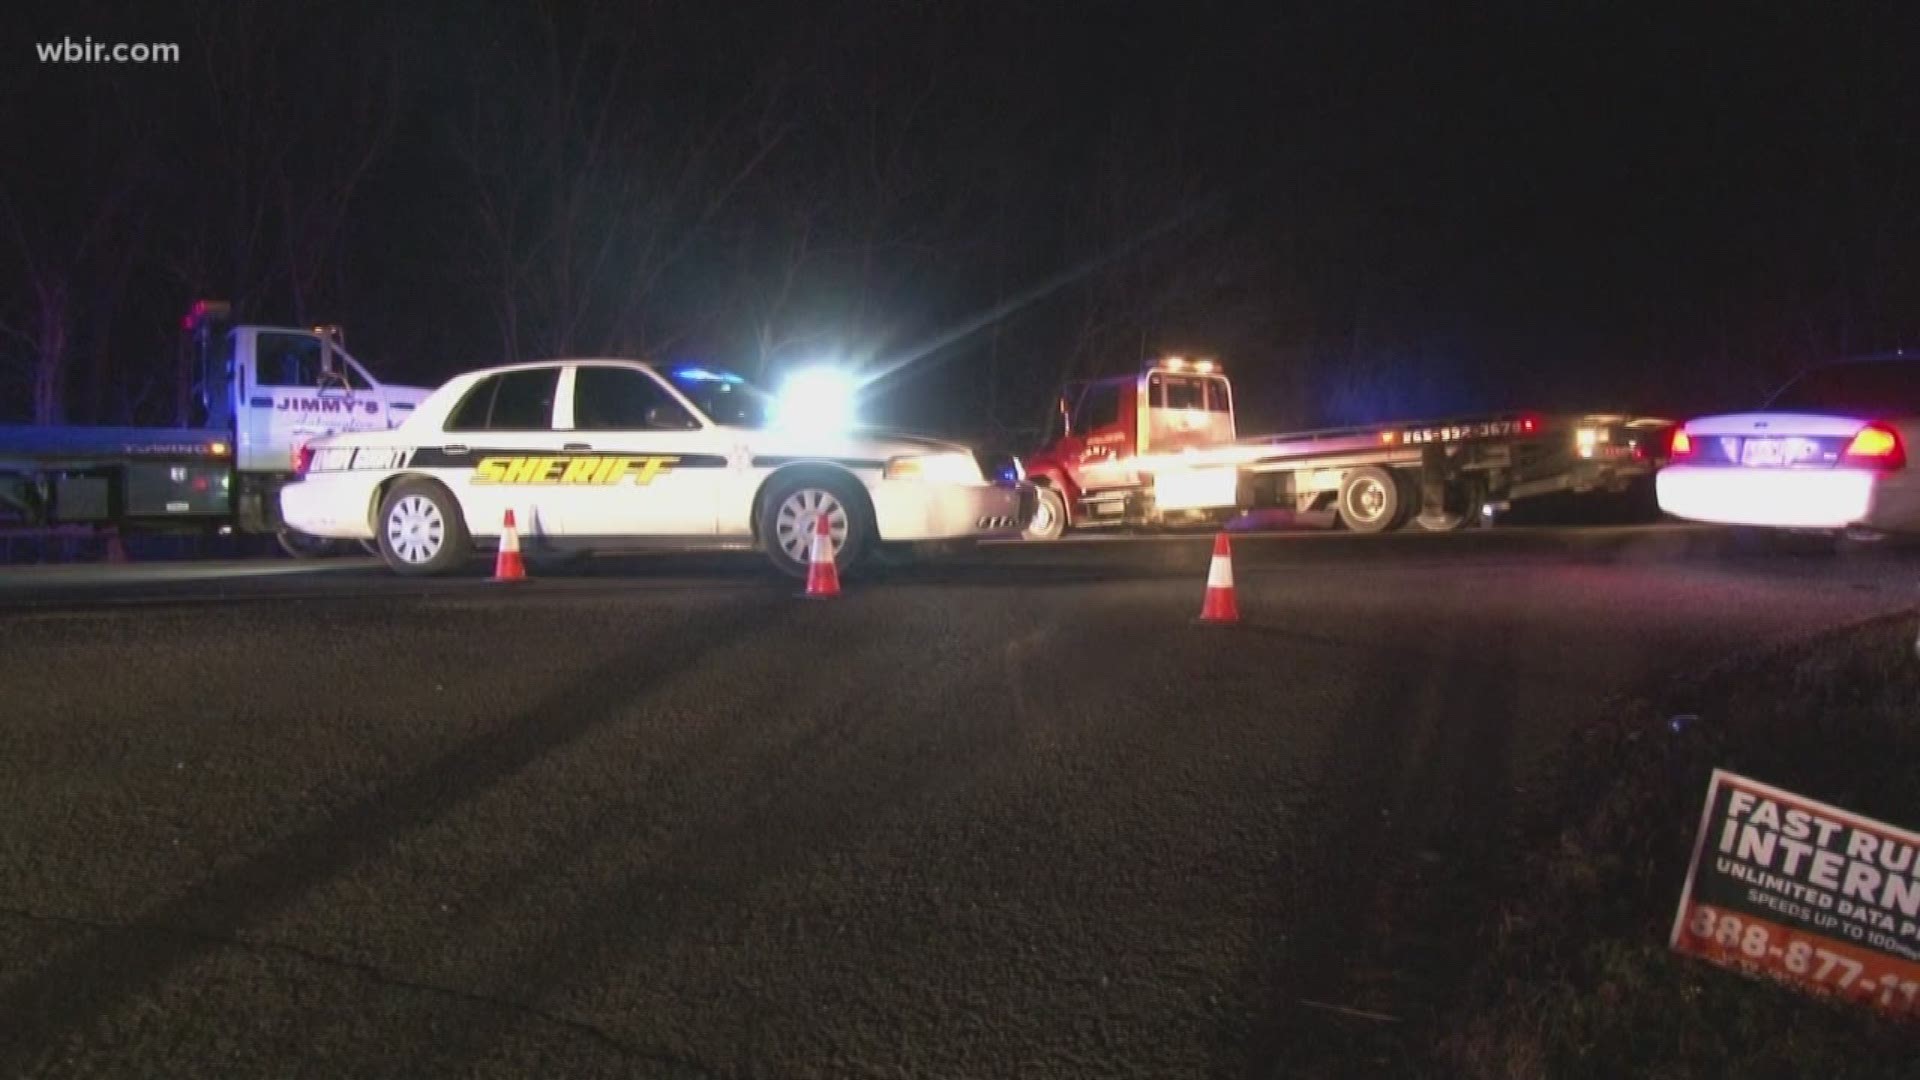 The Tennessee Highway Patrol says one person is dead after a car crash in union county tonight.